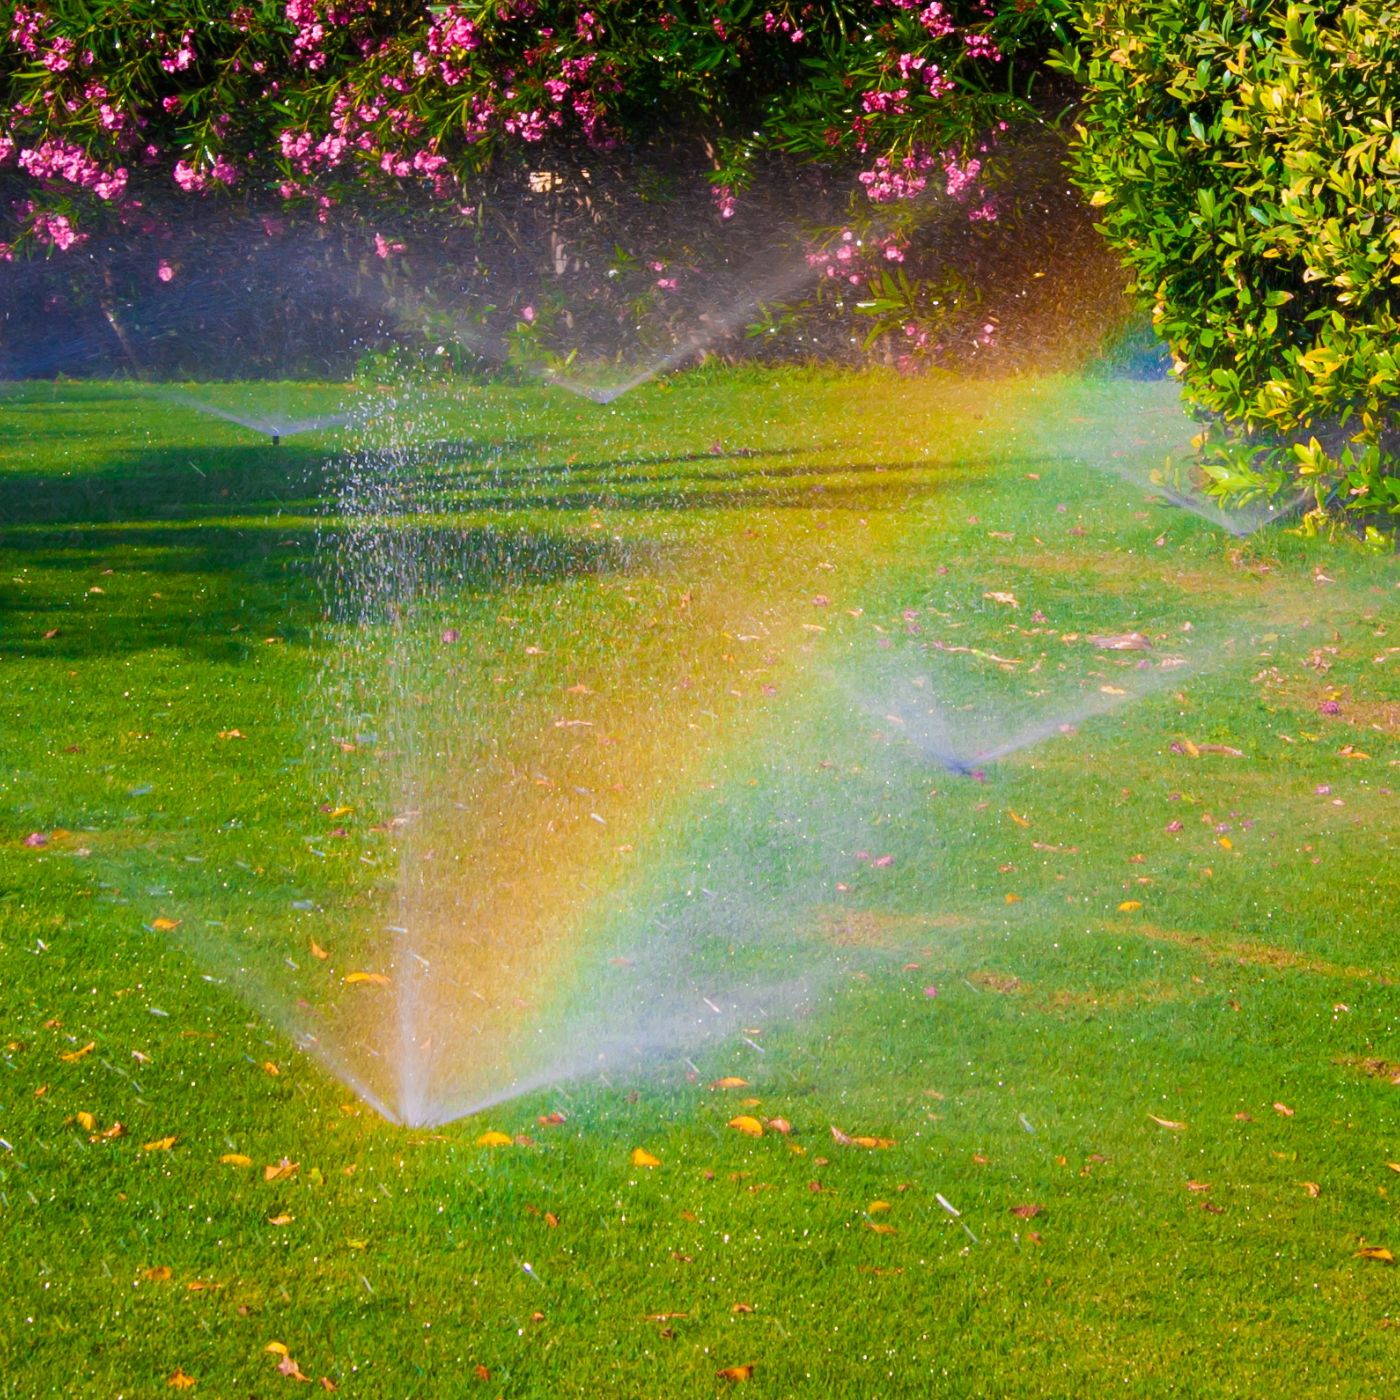 It’s Almost Time for Lawn Sprinkler Spring Turn Ons